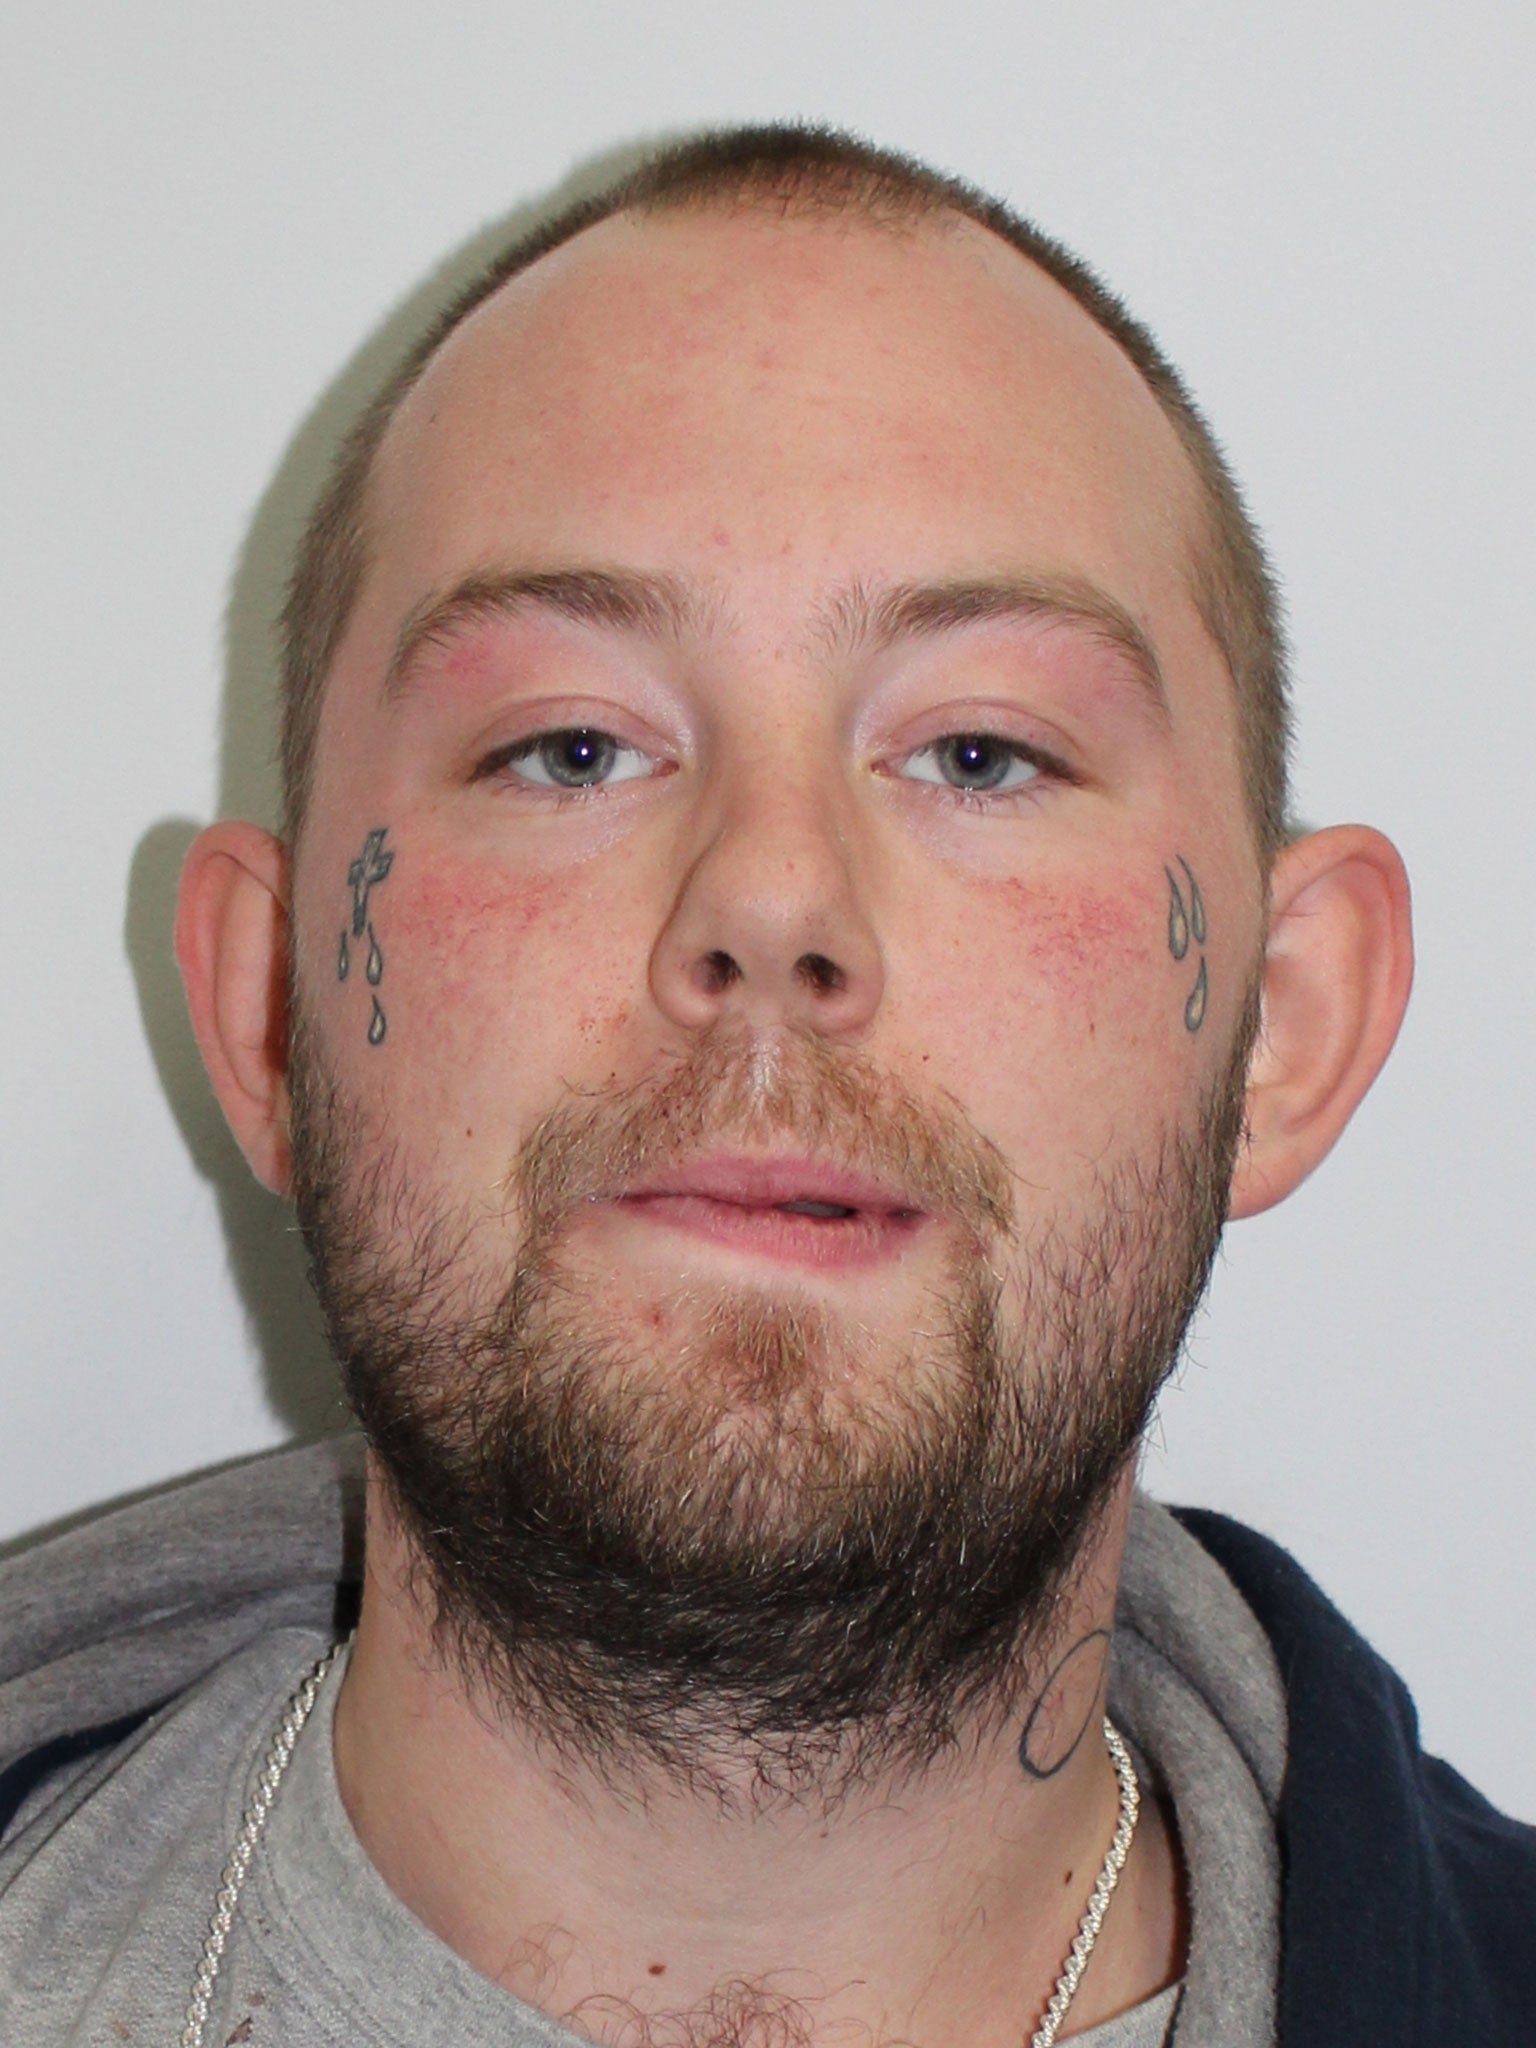 Police want to speak to John Tomlin, 24, in connection with an acid attack in Tollgate Road, E16.